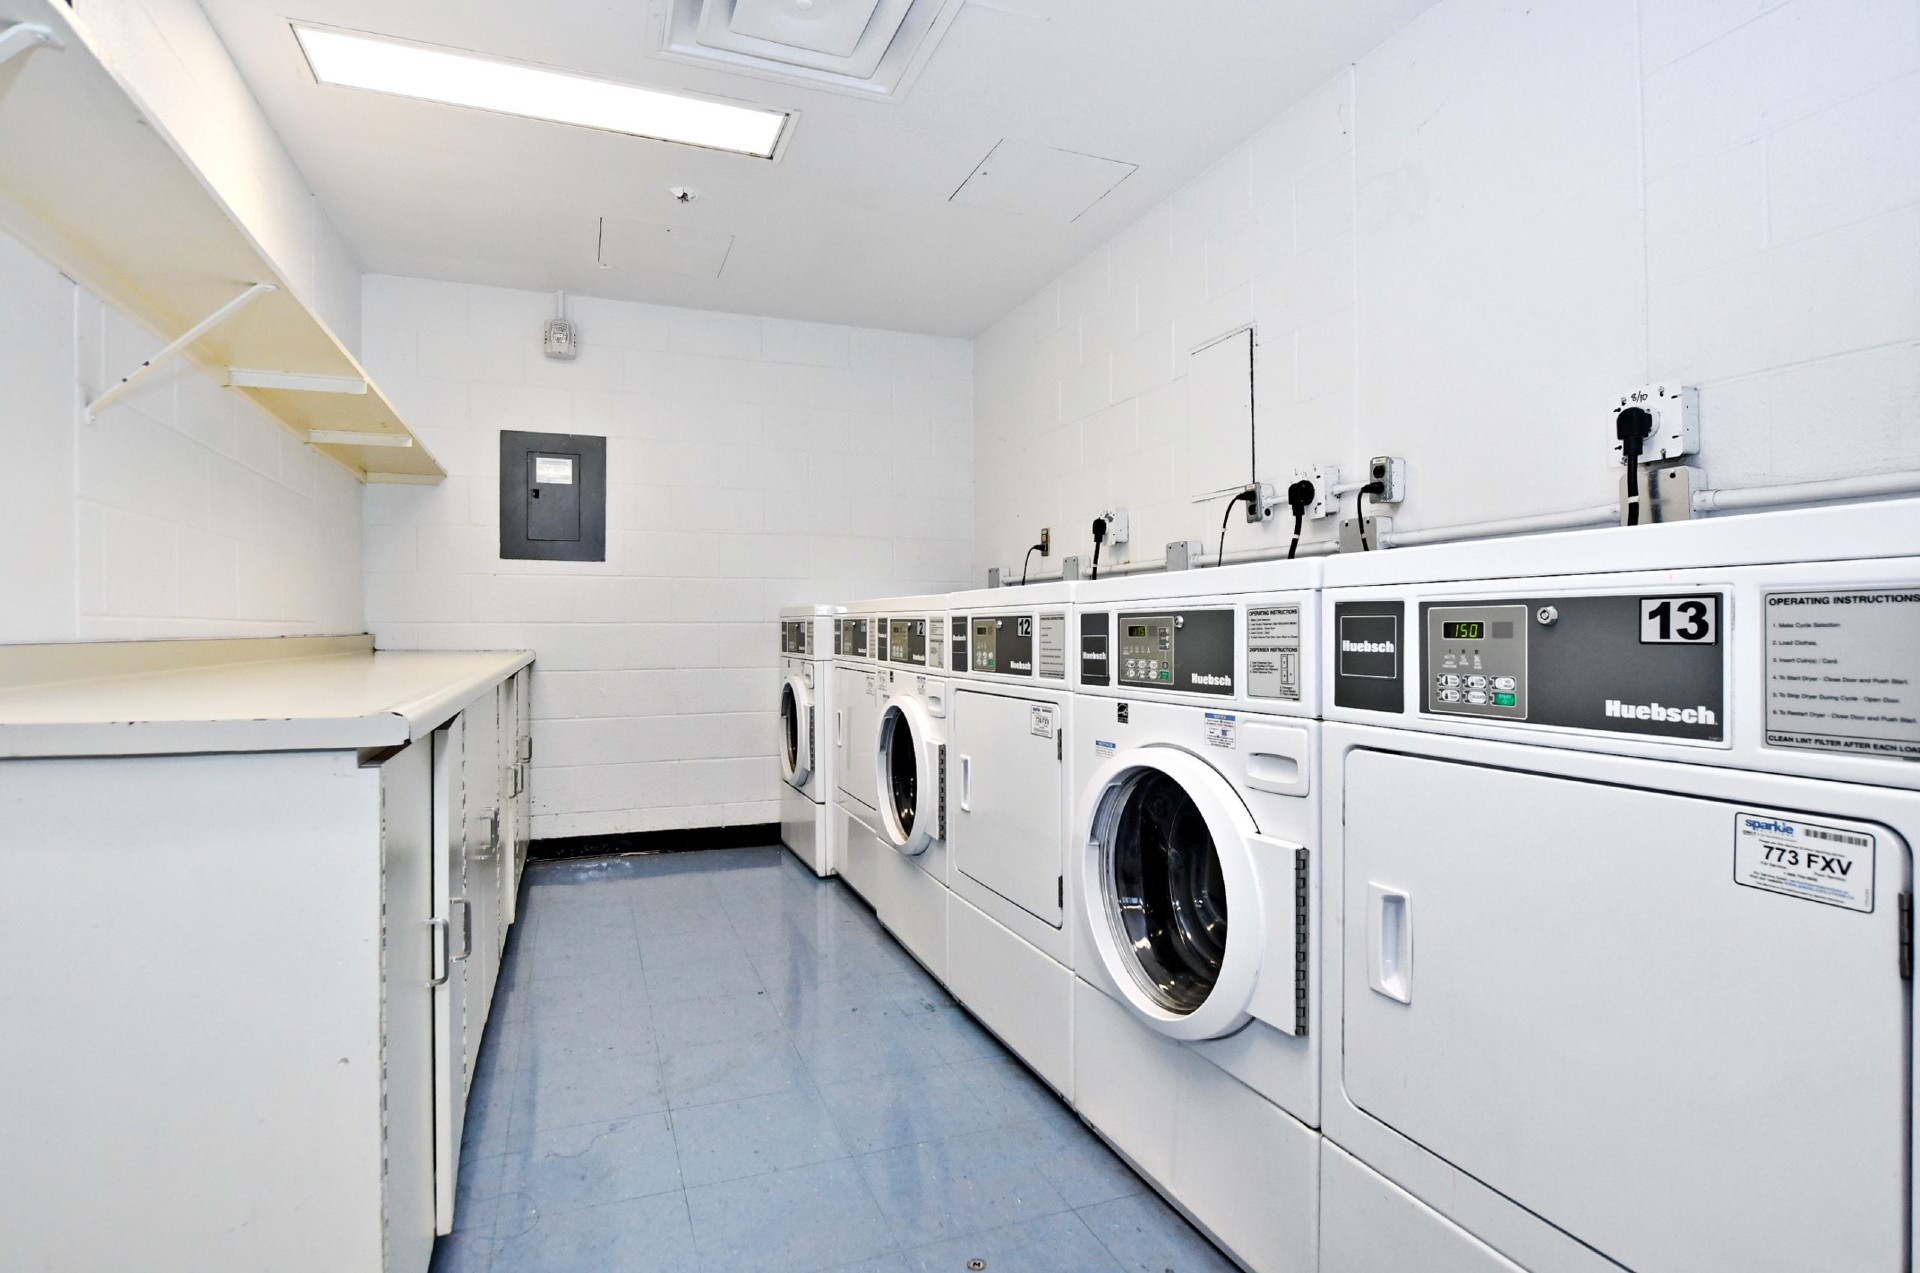 Picture of the laundry facilities in Tatham-Hall